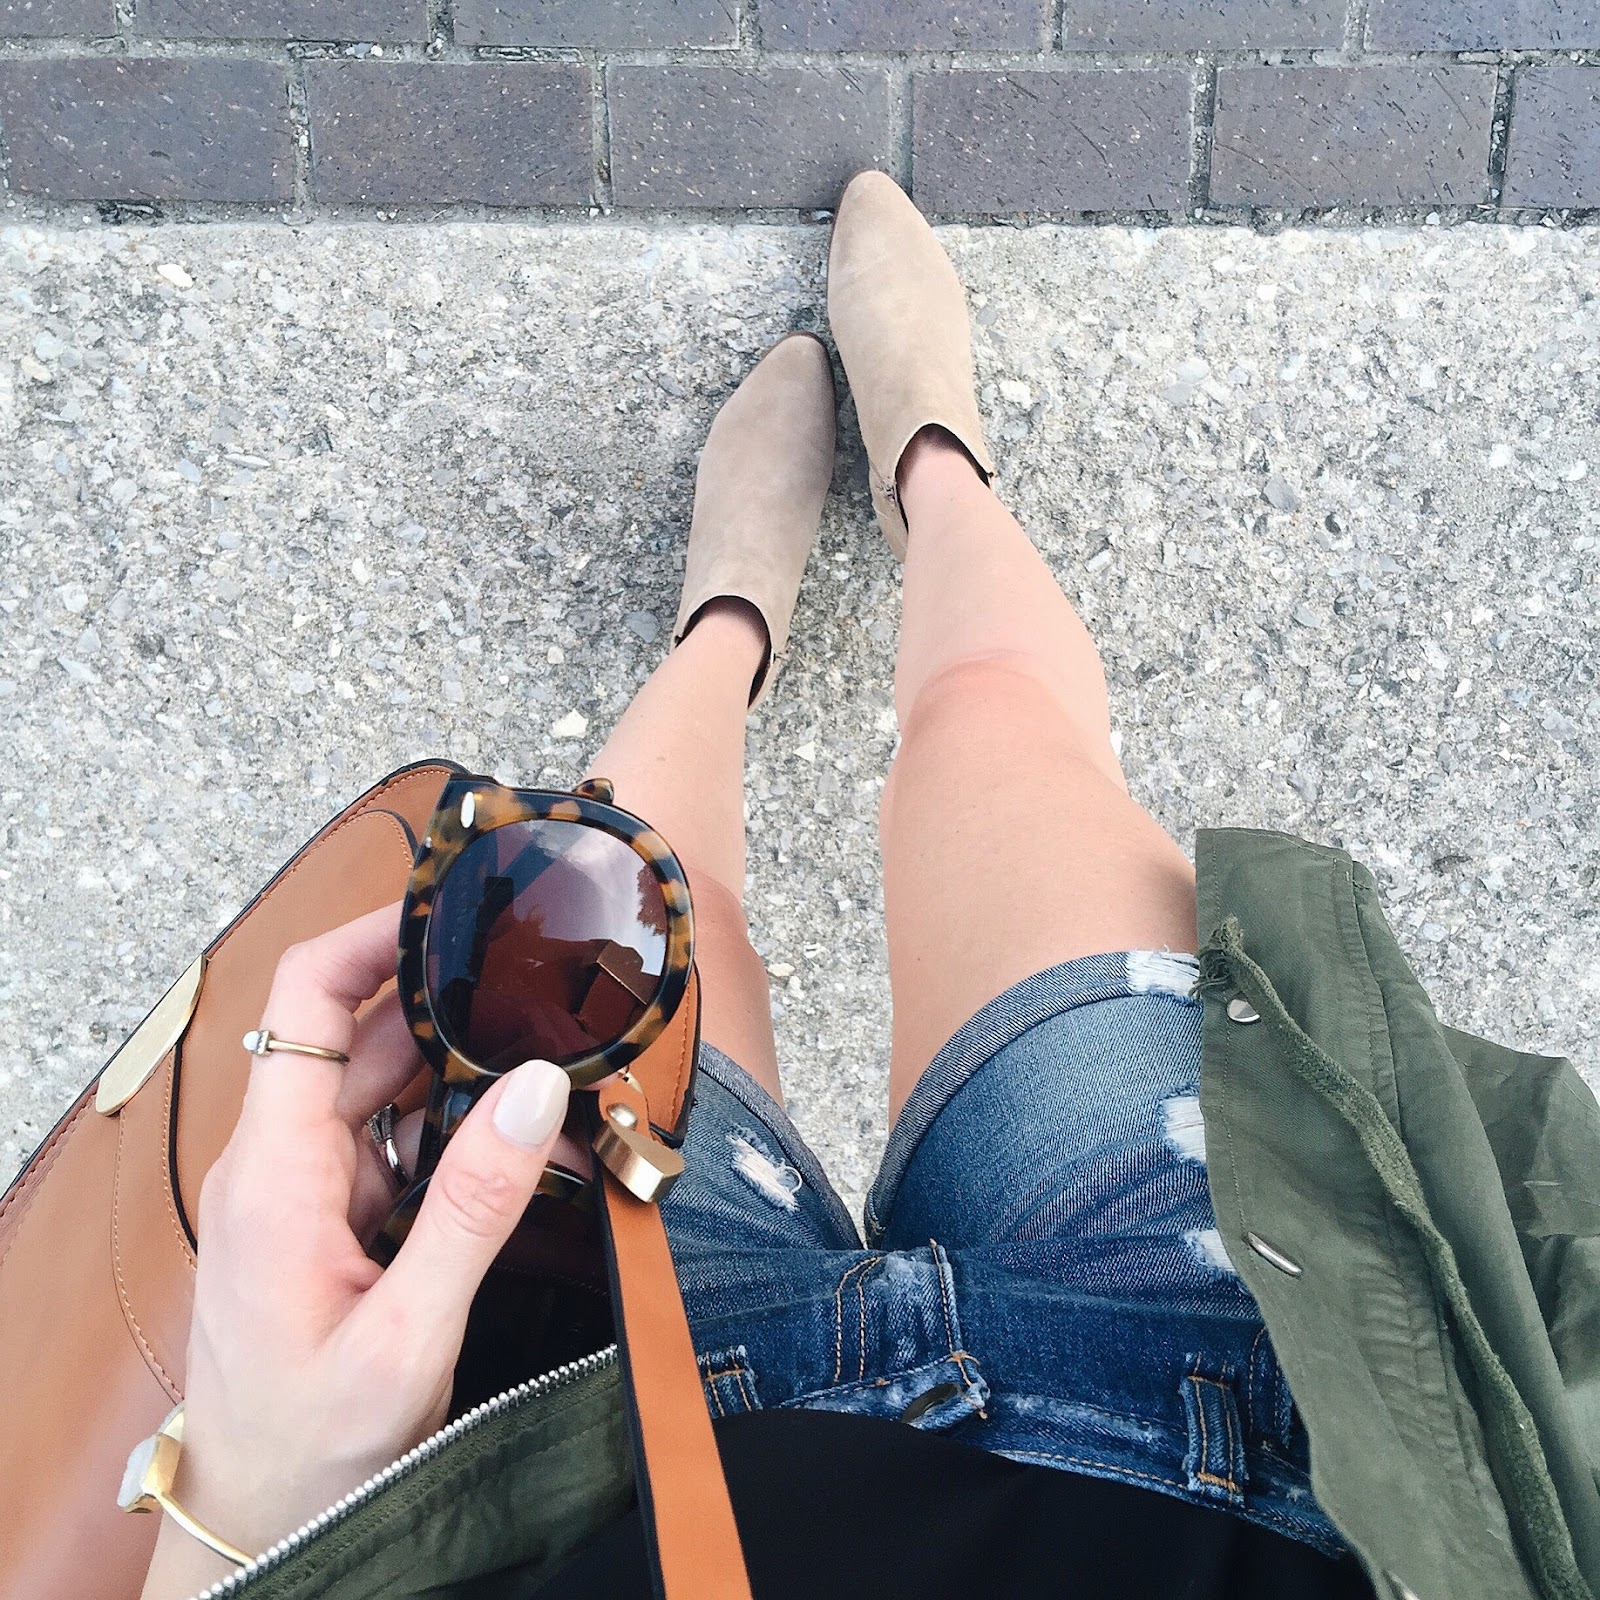 Shorts and ankle boots